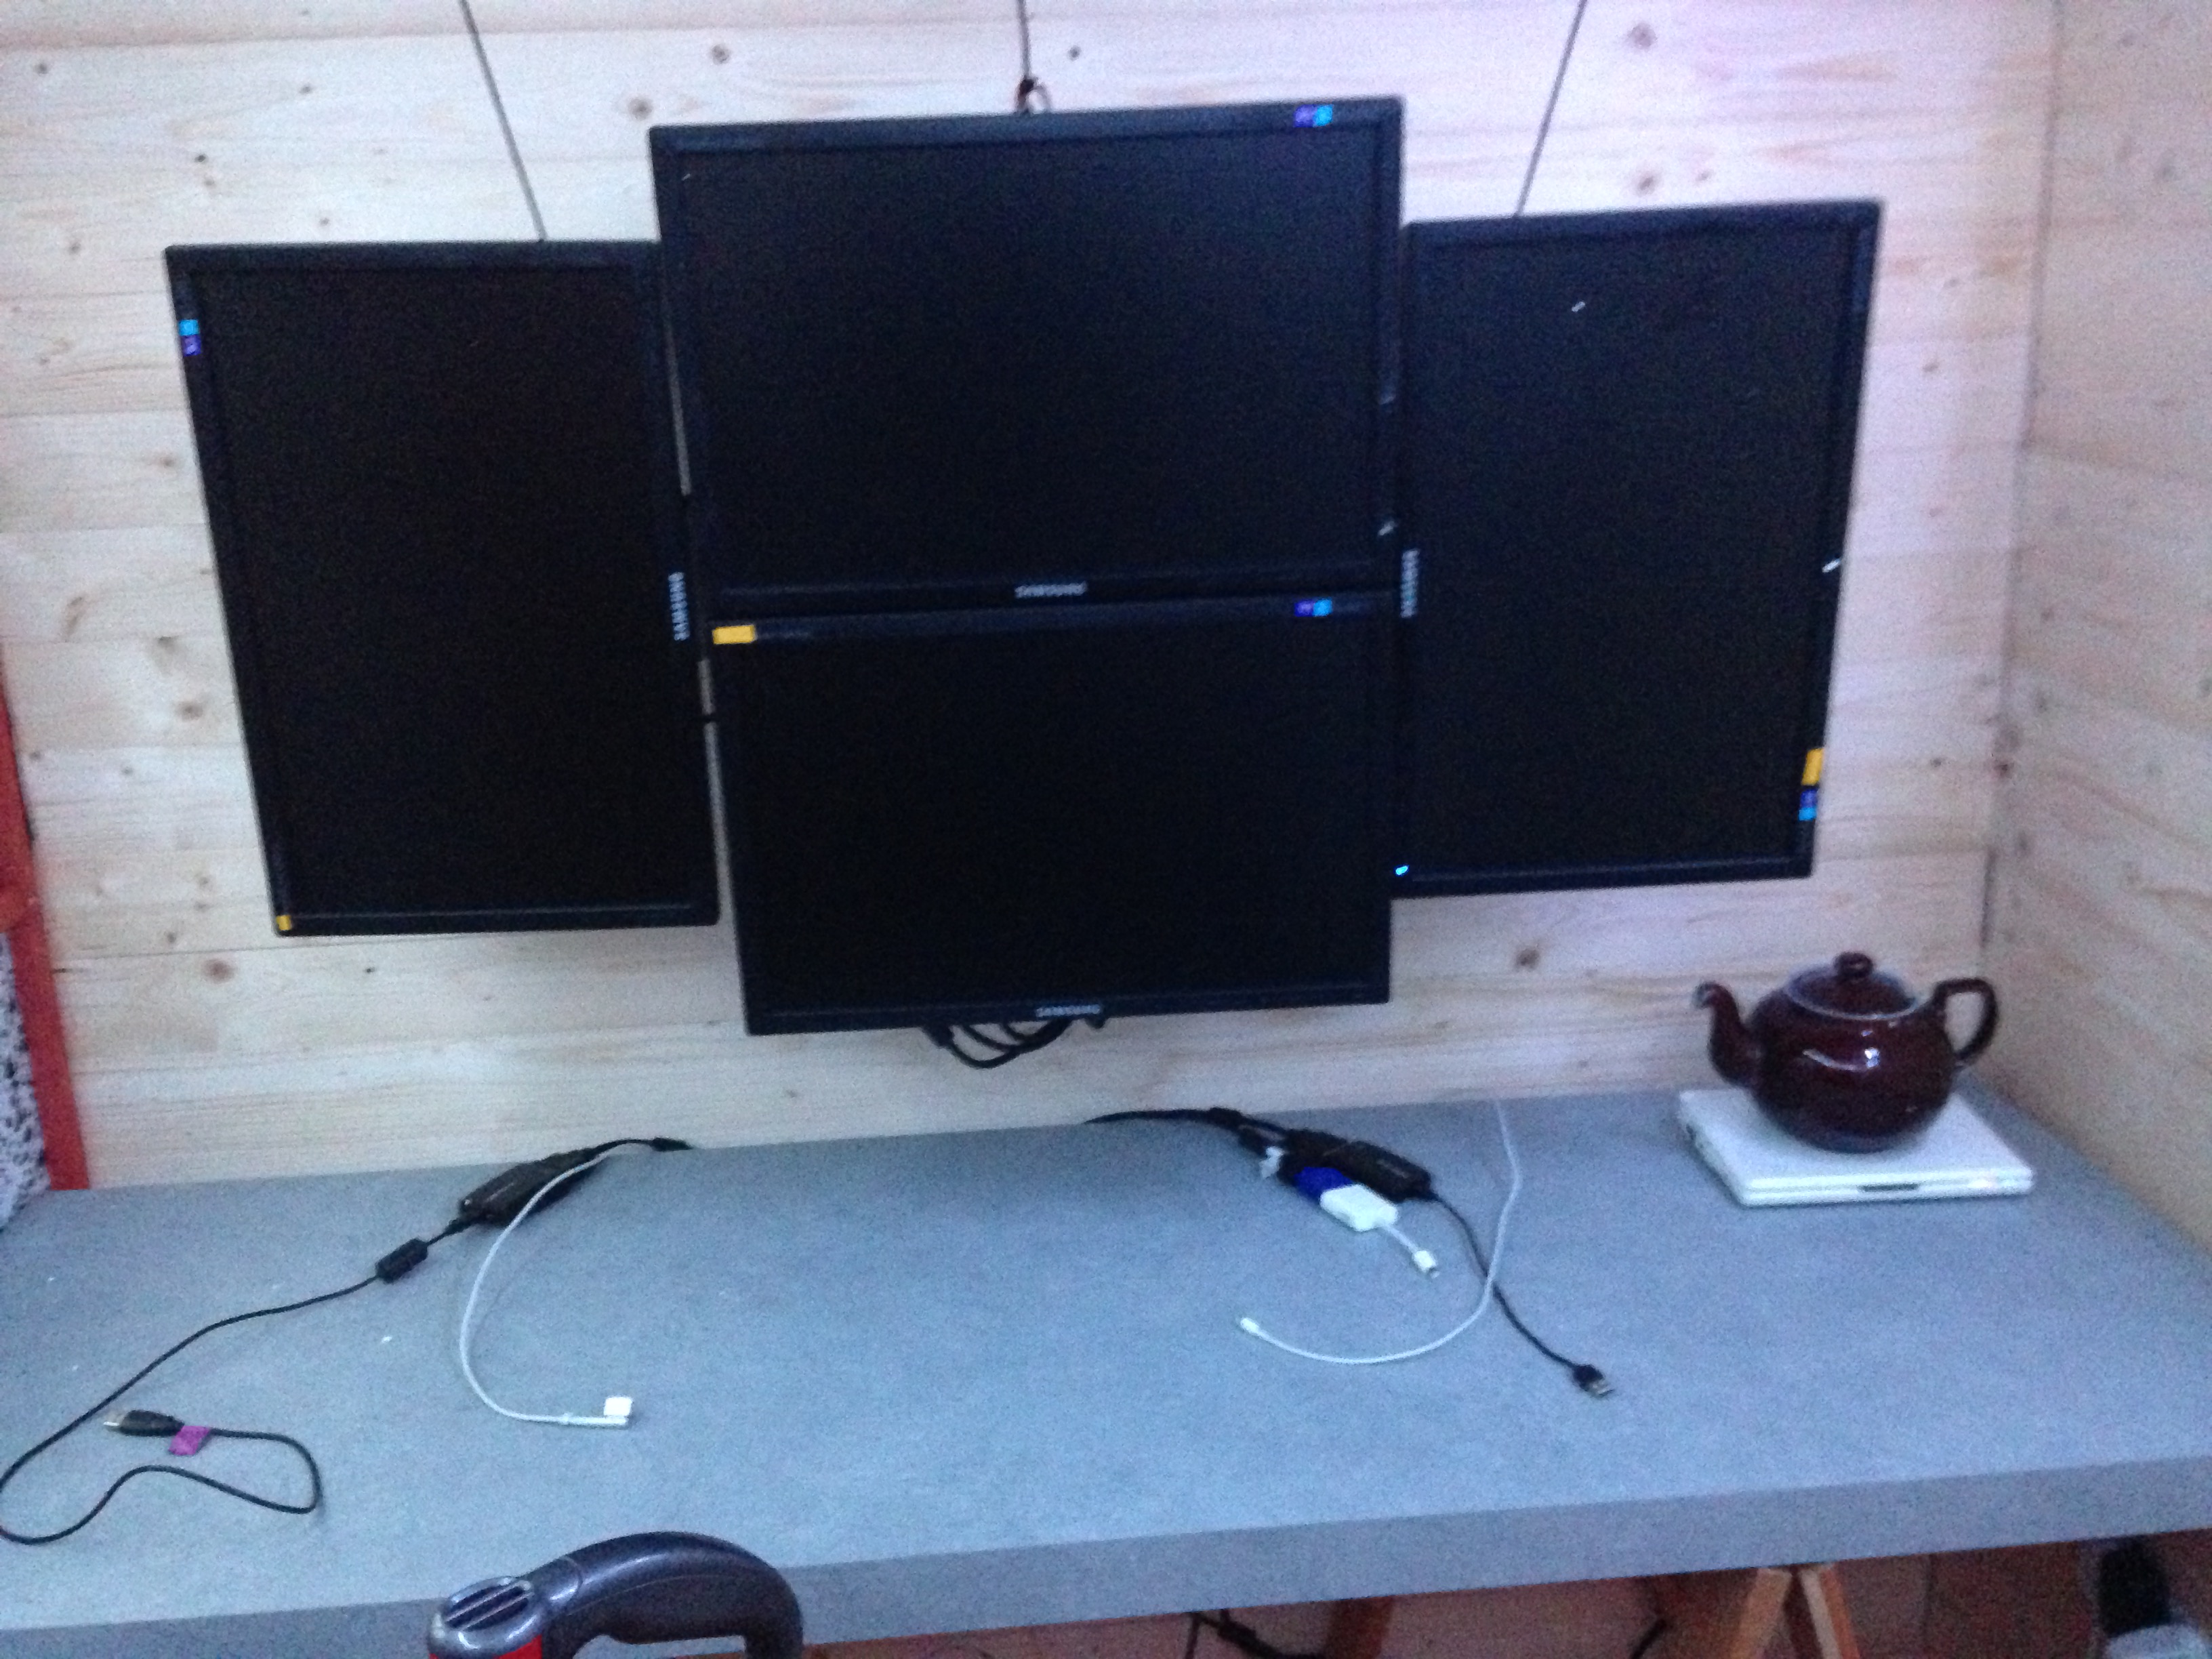 My monitors hanging in front of a fully cladded wall with the cables tidied away